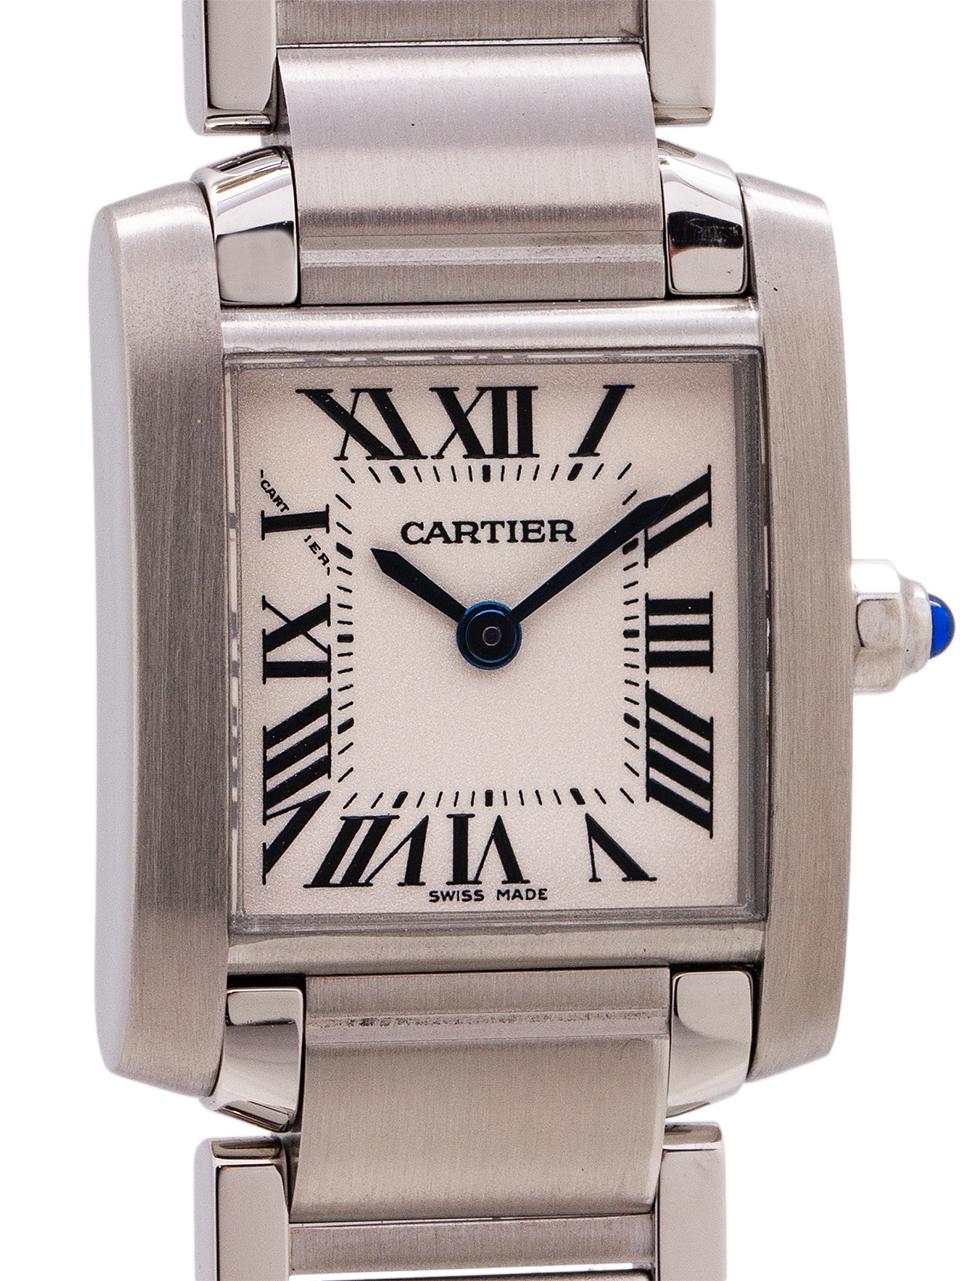   
Cartier Stainless Steel Lady Tank Francaise ref 3217 circa 2018. This virtually brand new Tank features a 20 X 25mm stainless steel case with sapphire crystal and blue sapphire cabochon crown. Classic antique white dial with black Roman numerals